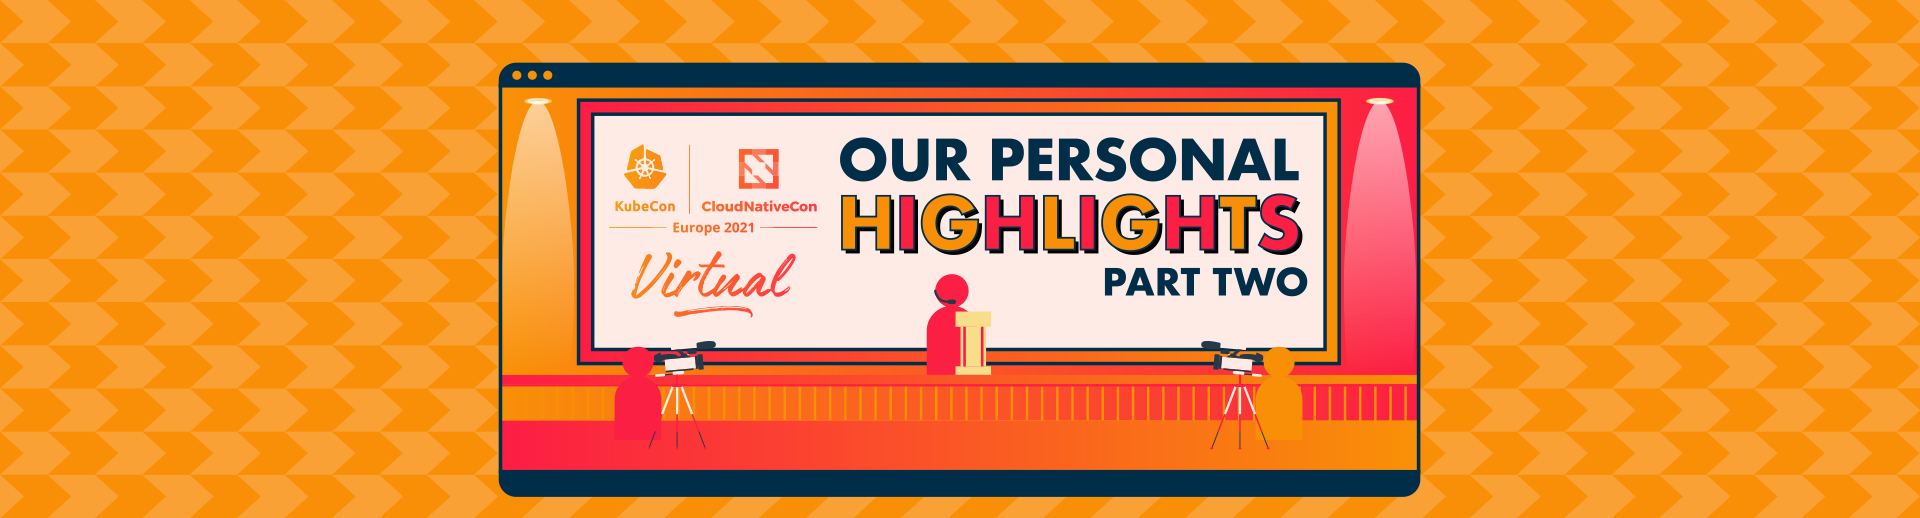 A speaker giving a presentation with KubeCon branding and the title 'Our Personal Highlights: Part Two'